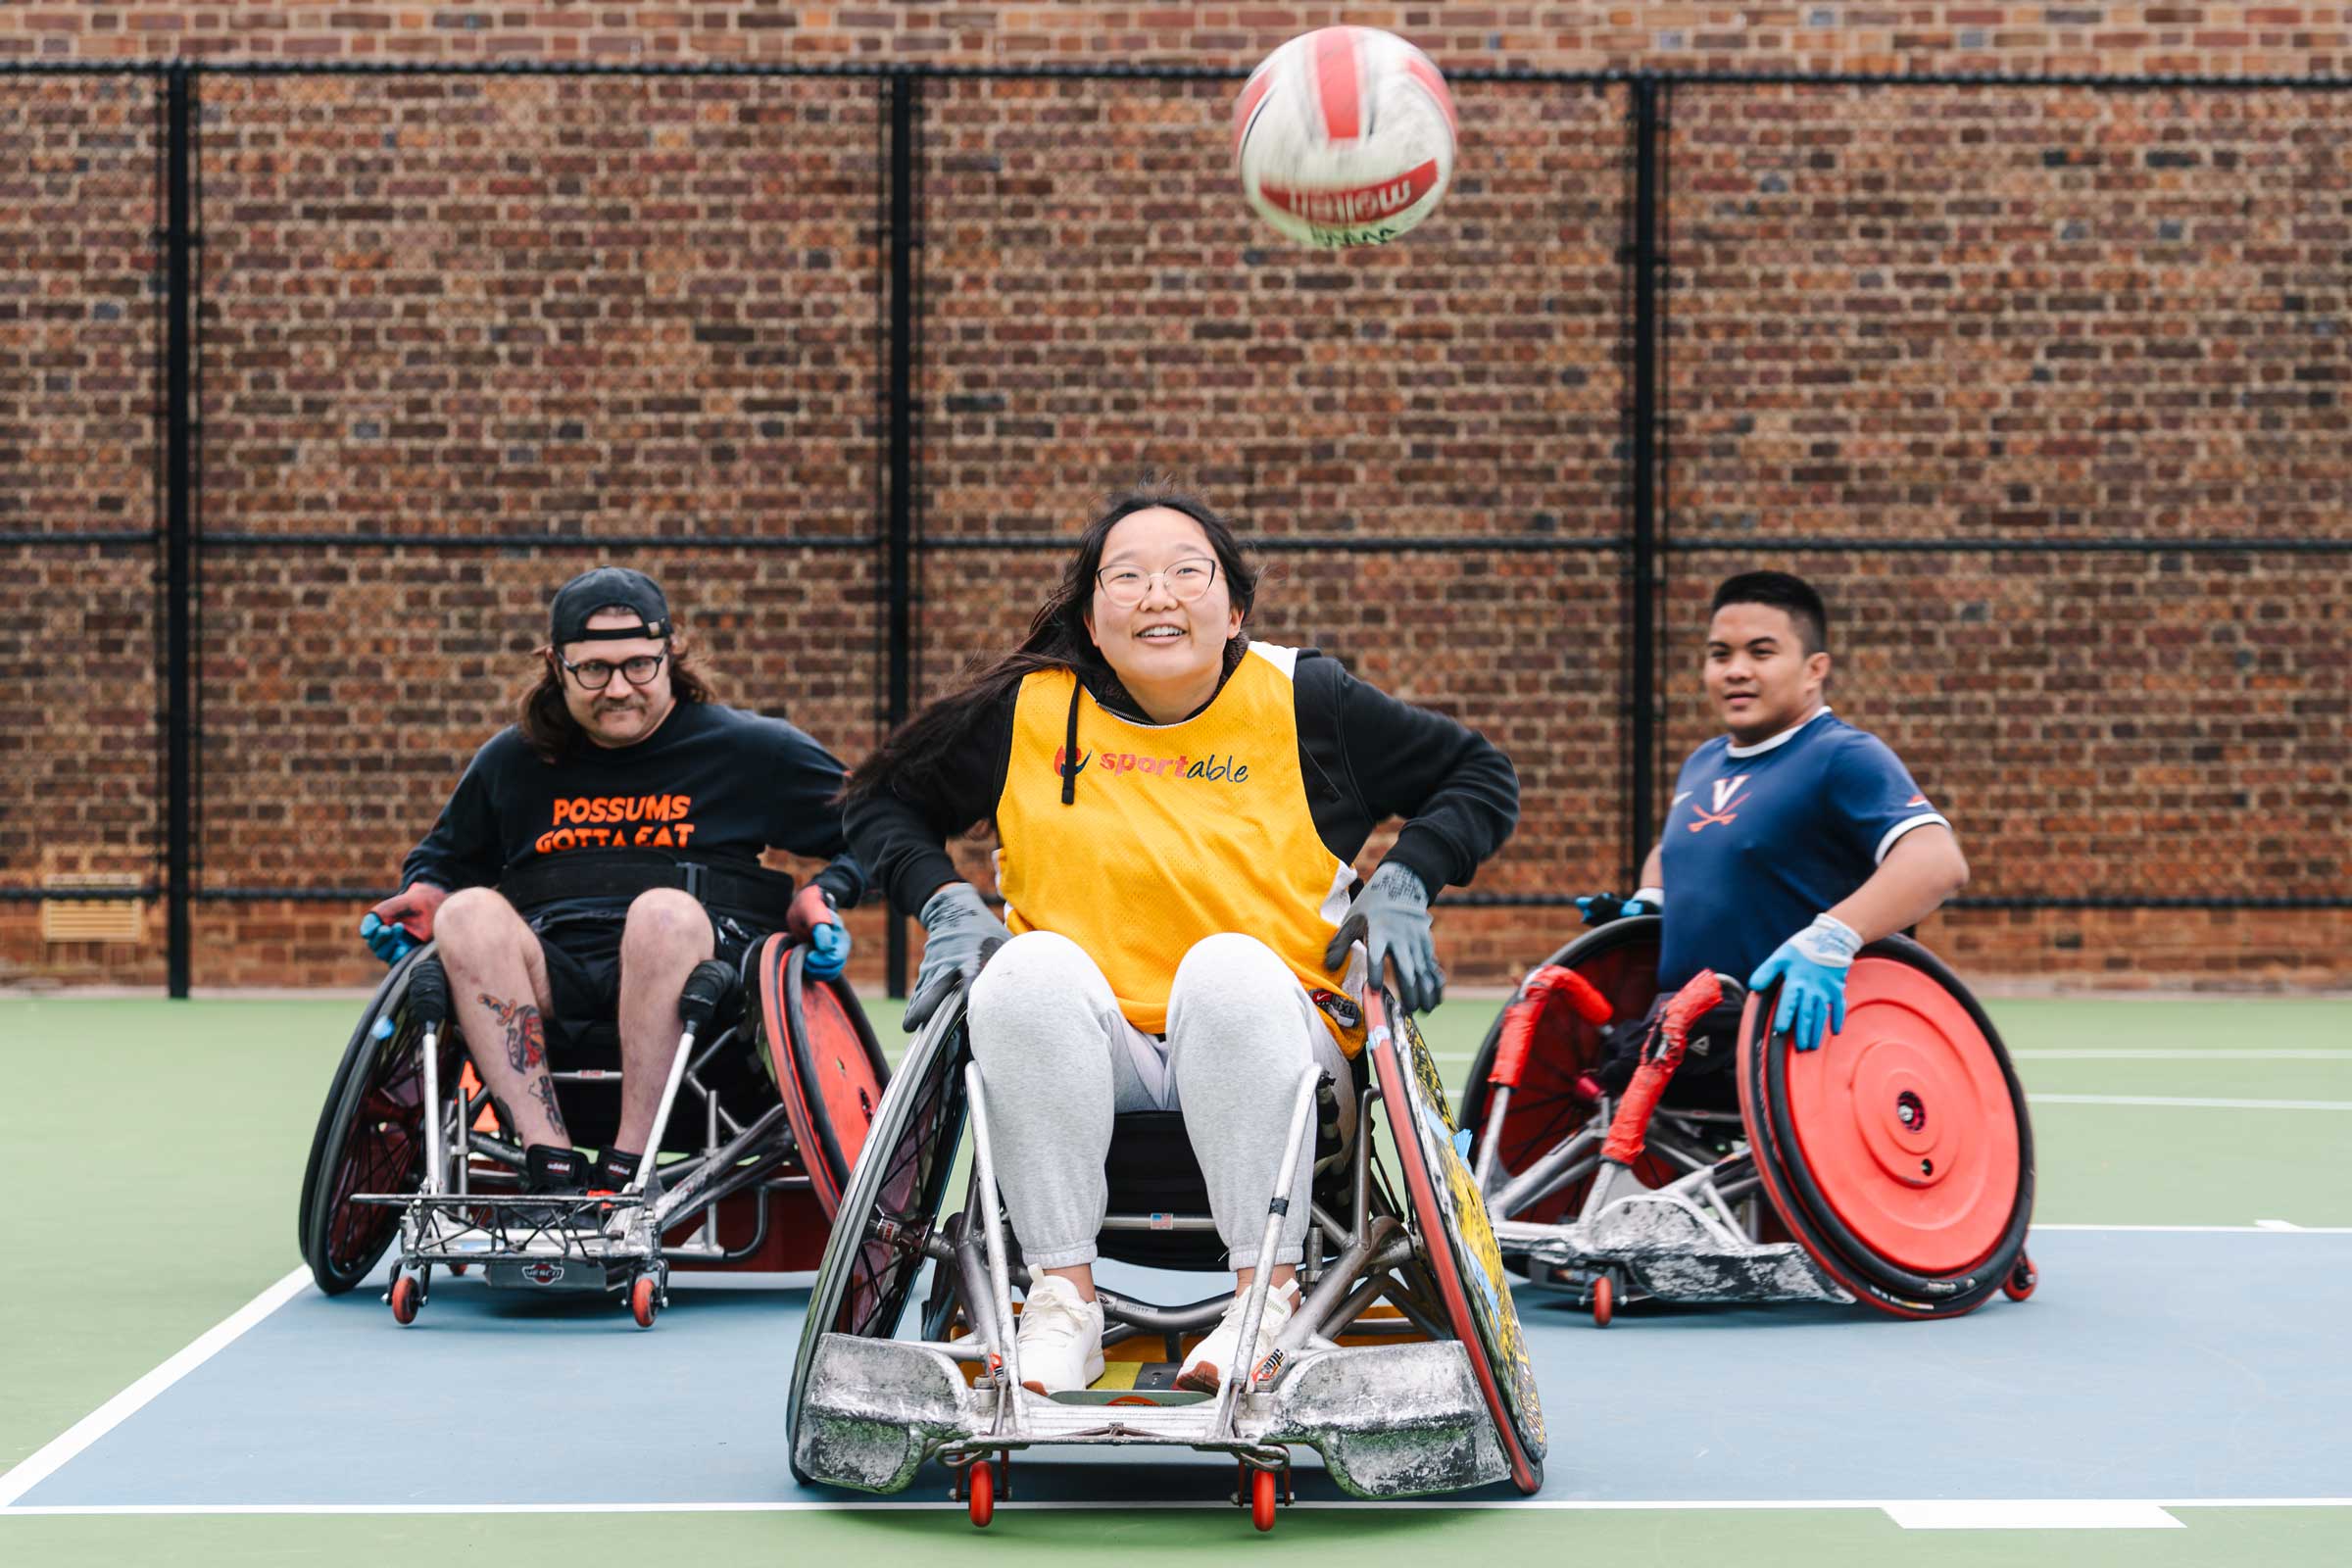 Individuals with disabilities playing wheelchair basketball.